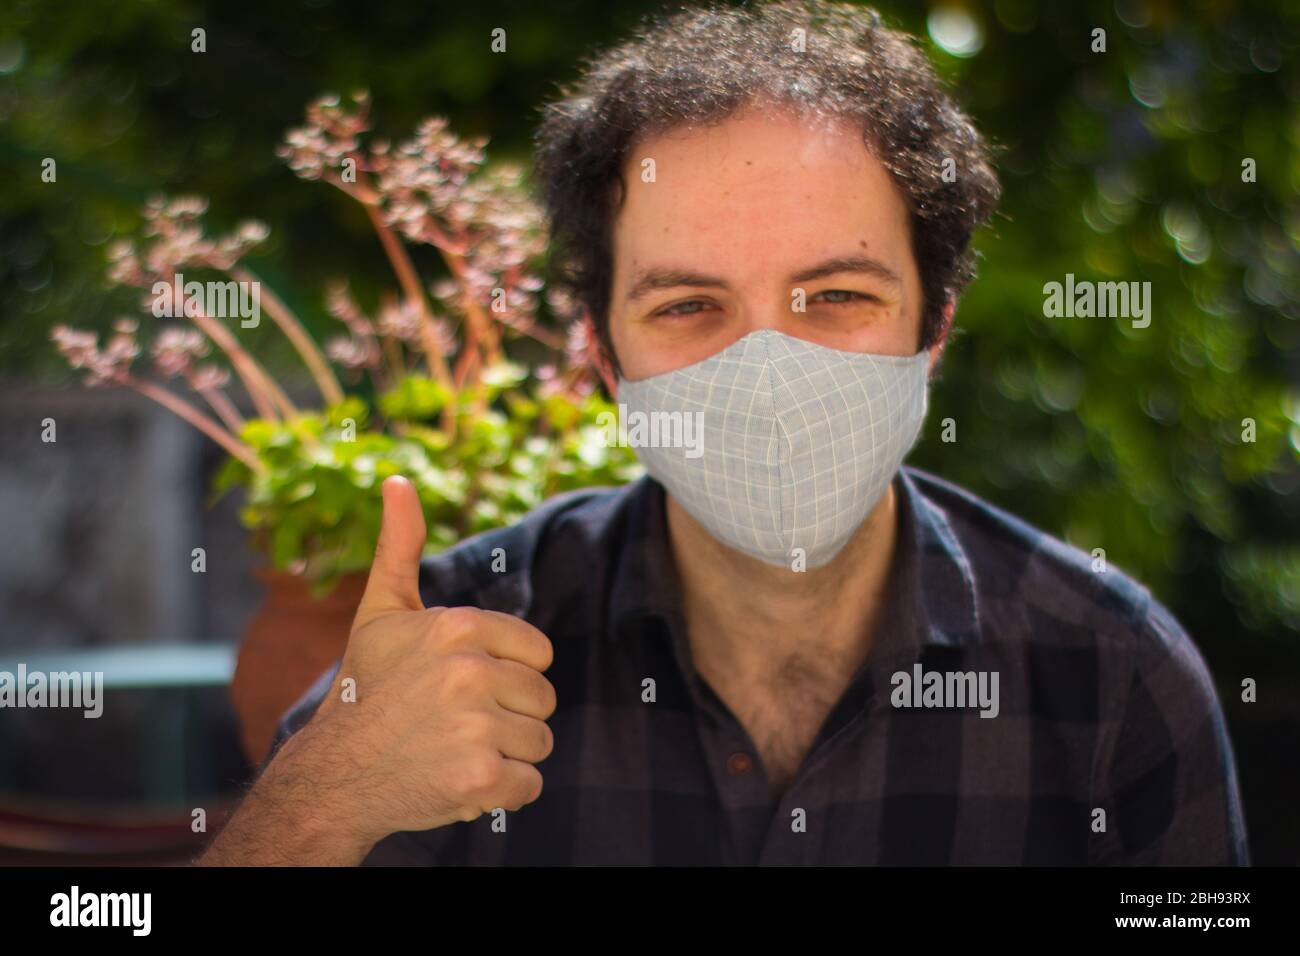 Young man with a prevention mask doing 'ok' sign Stock Photo